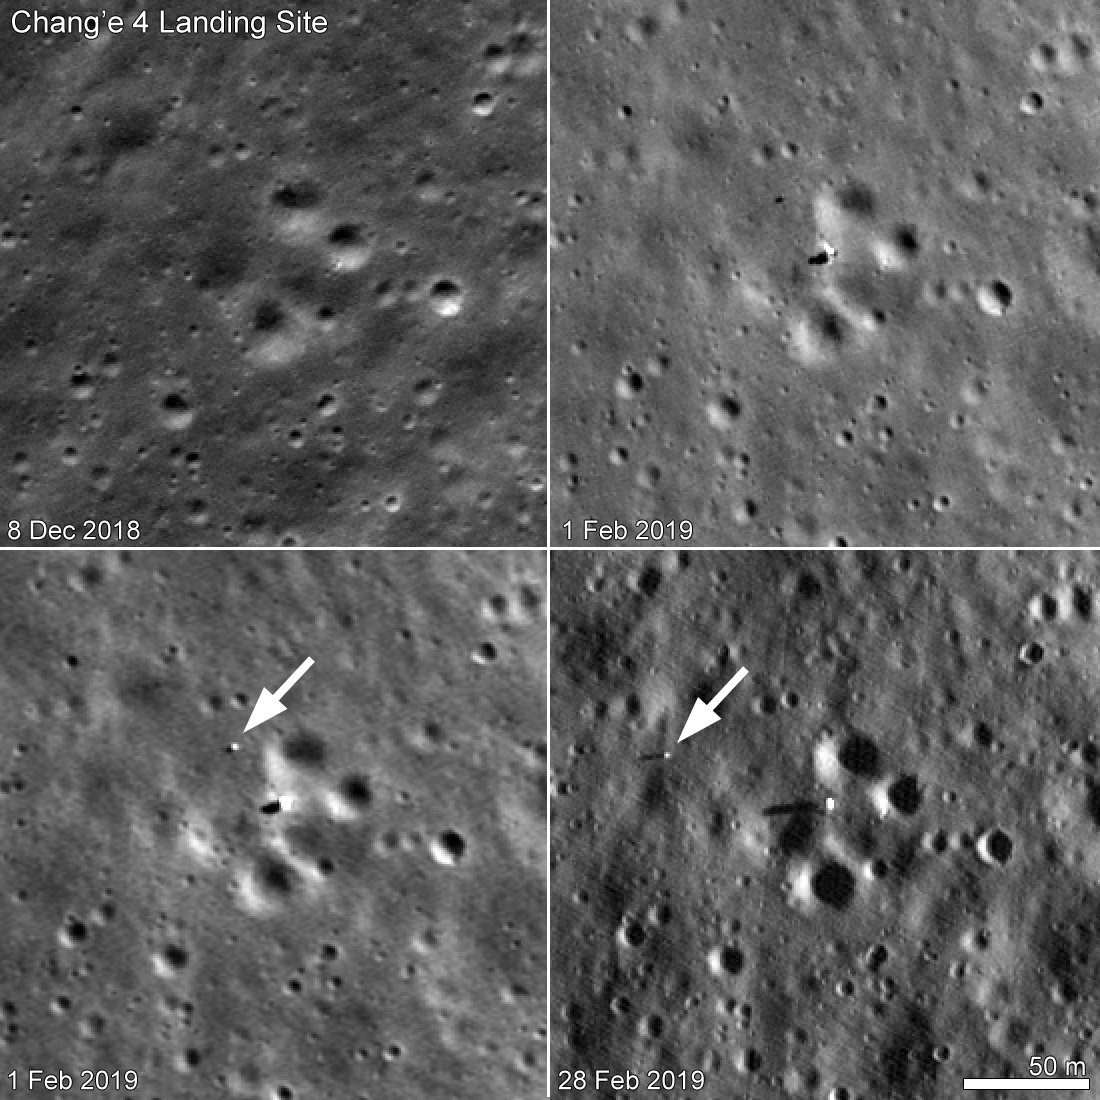 LRO image of the Chang’e 4 lander and Yutu 2 rover that landed on the Moon’s far side on Jan. 3, 2019